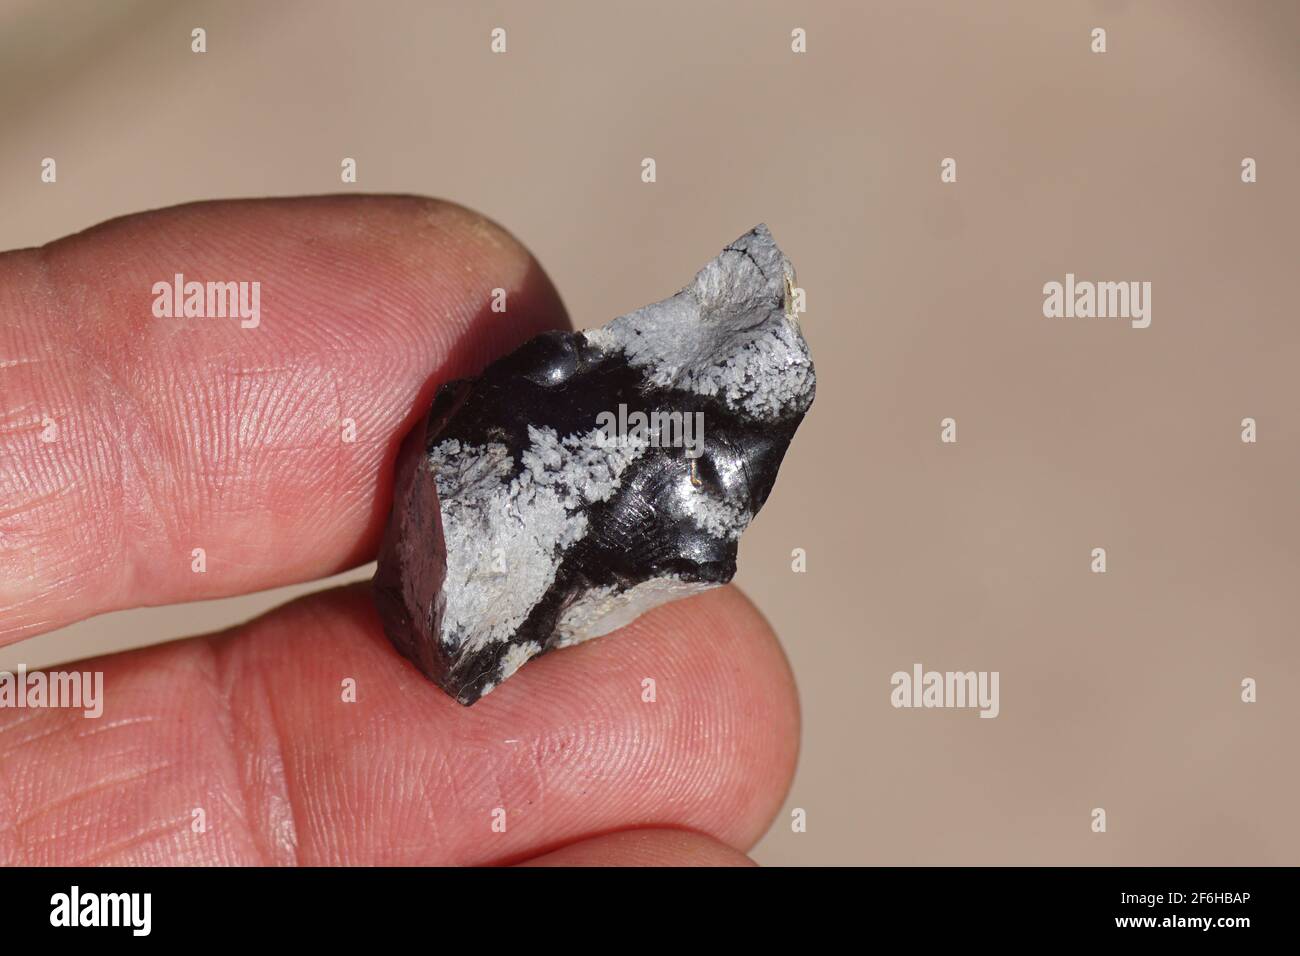 Holding a piece of Obsidian in the hand. Obsidianis a naturally occurring volcanic glass formed as an extrusive igneous rock. March, Netherlands. Stock Photo